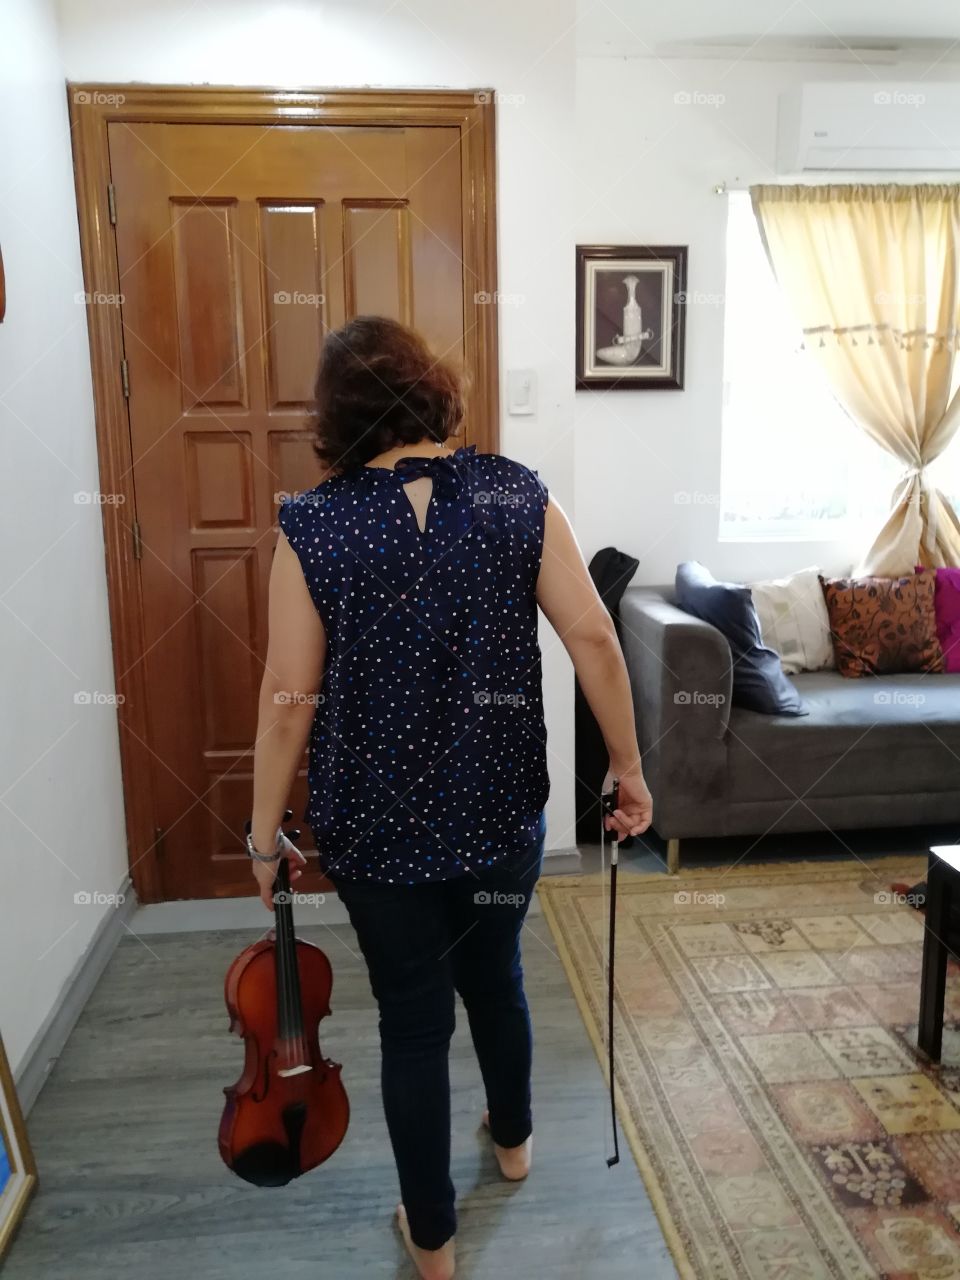 Learning how to play the violin